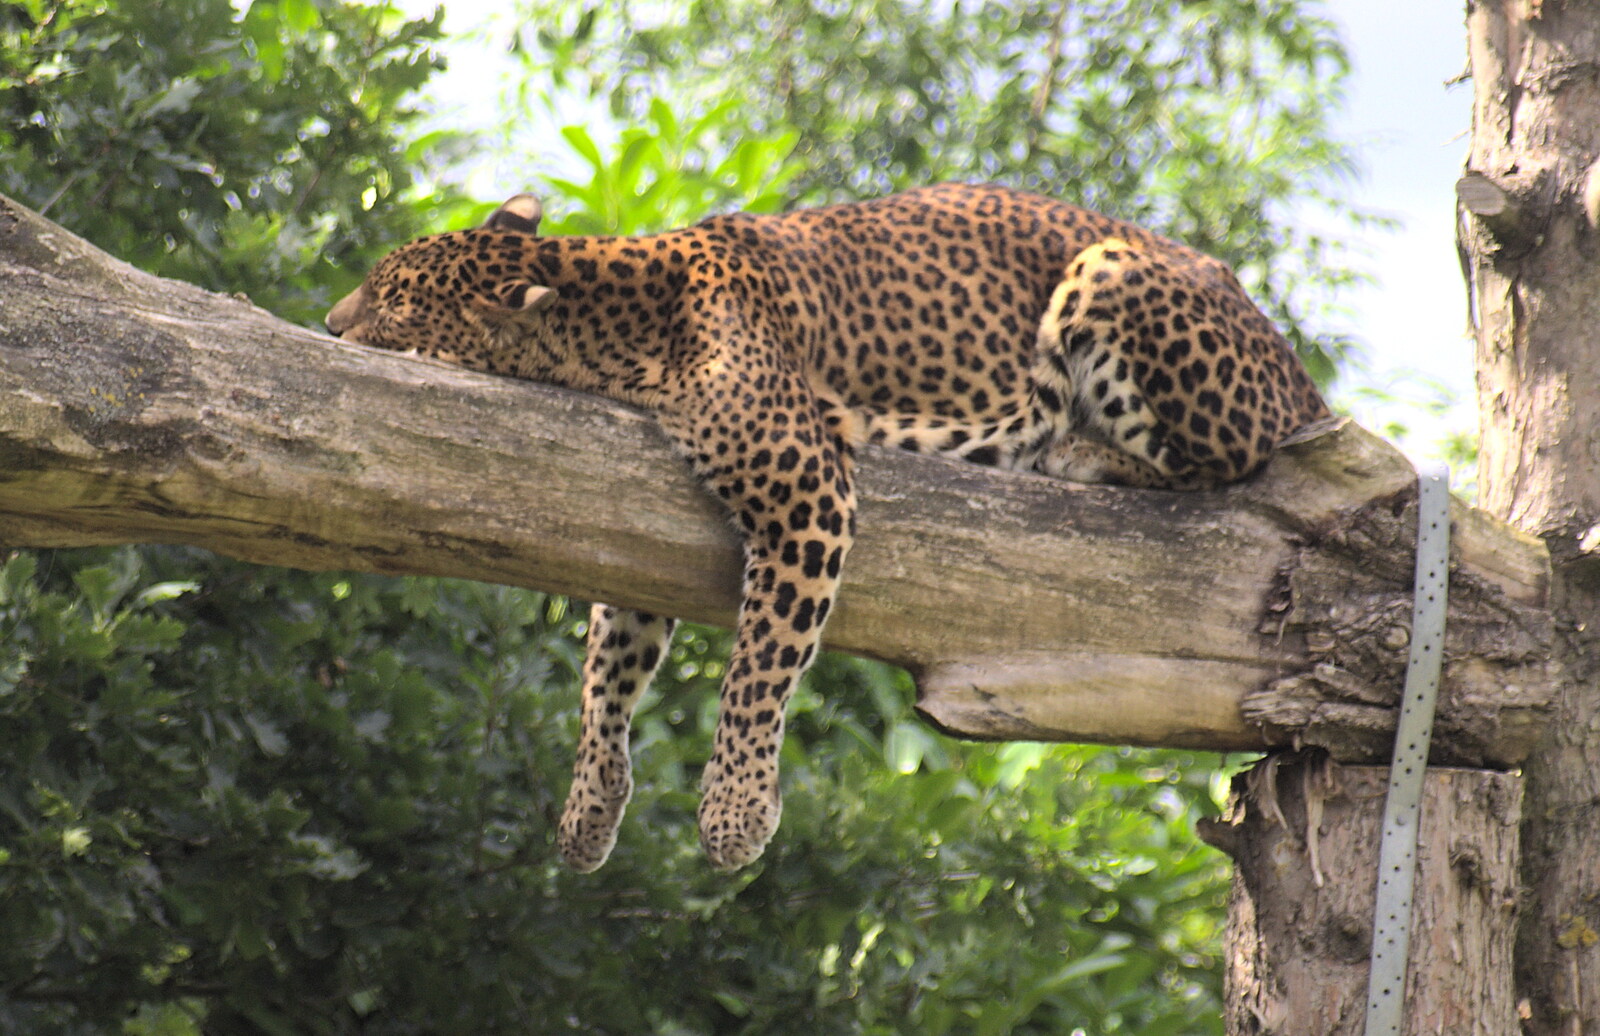 Lazy days: a leopard hangs around in a tree from Tiger Cubs at Banham Zoo, Banham, Norfolk - 6th August 2013